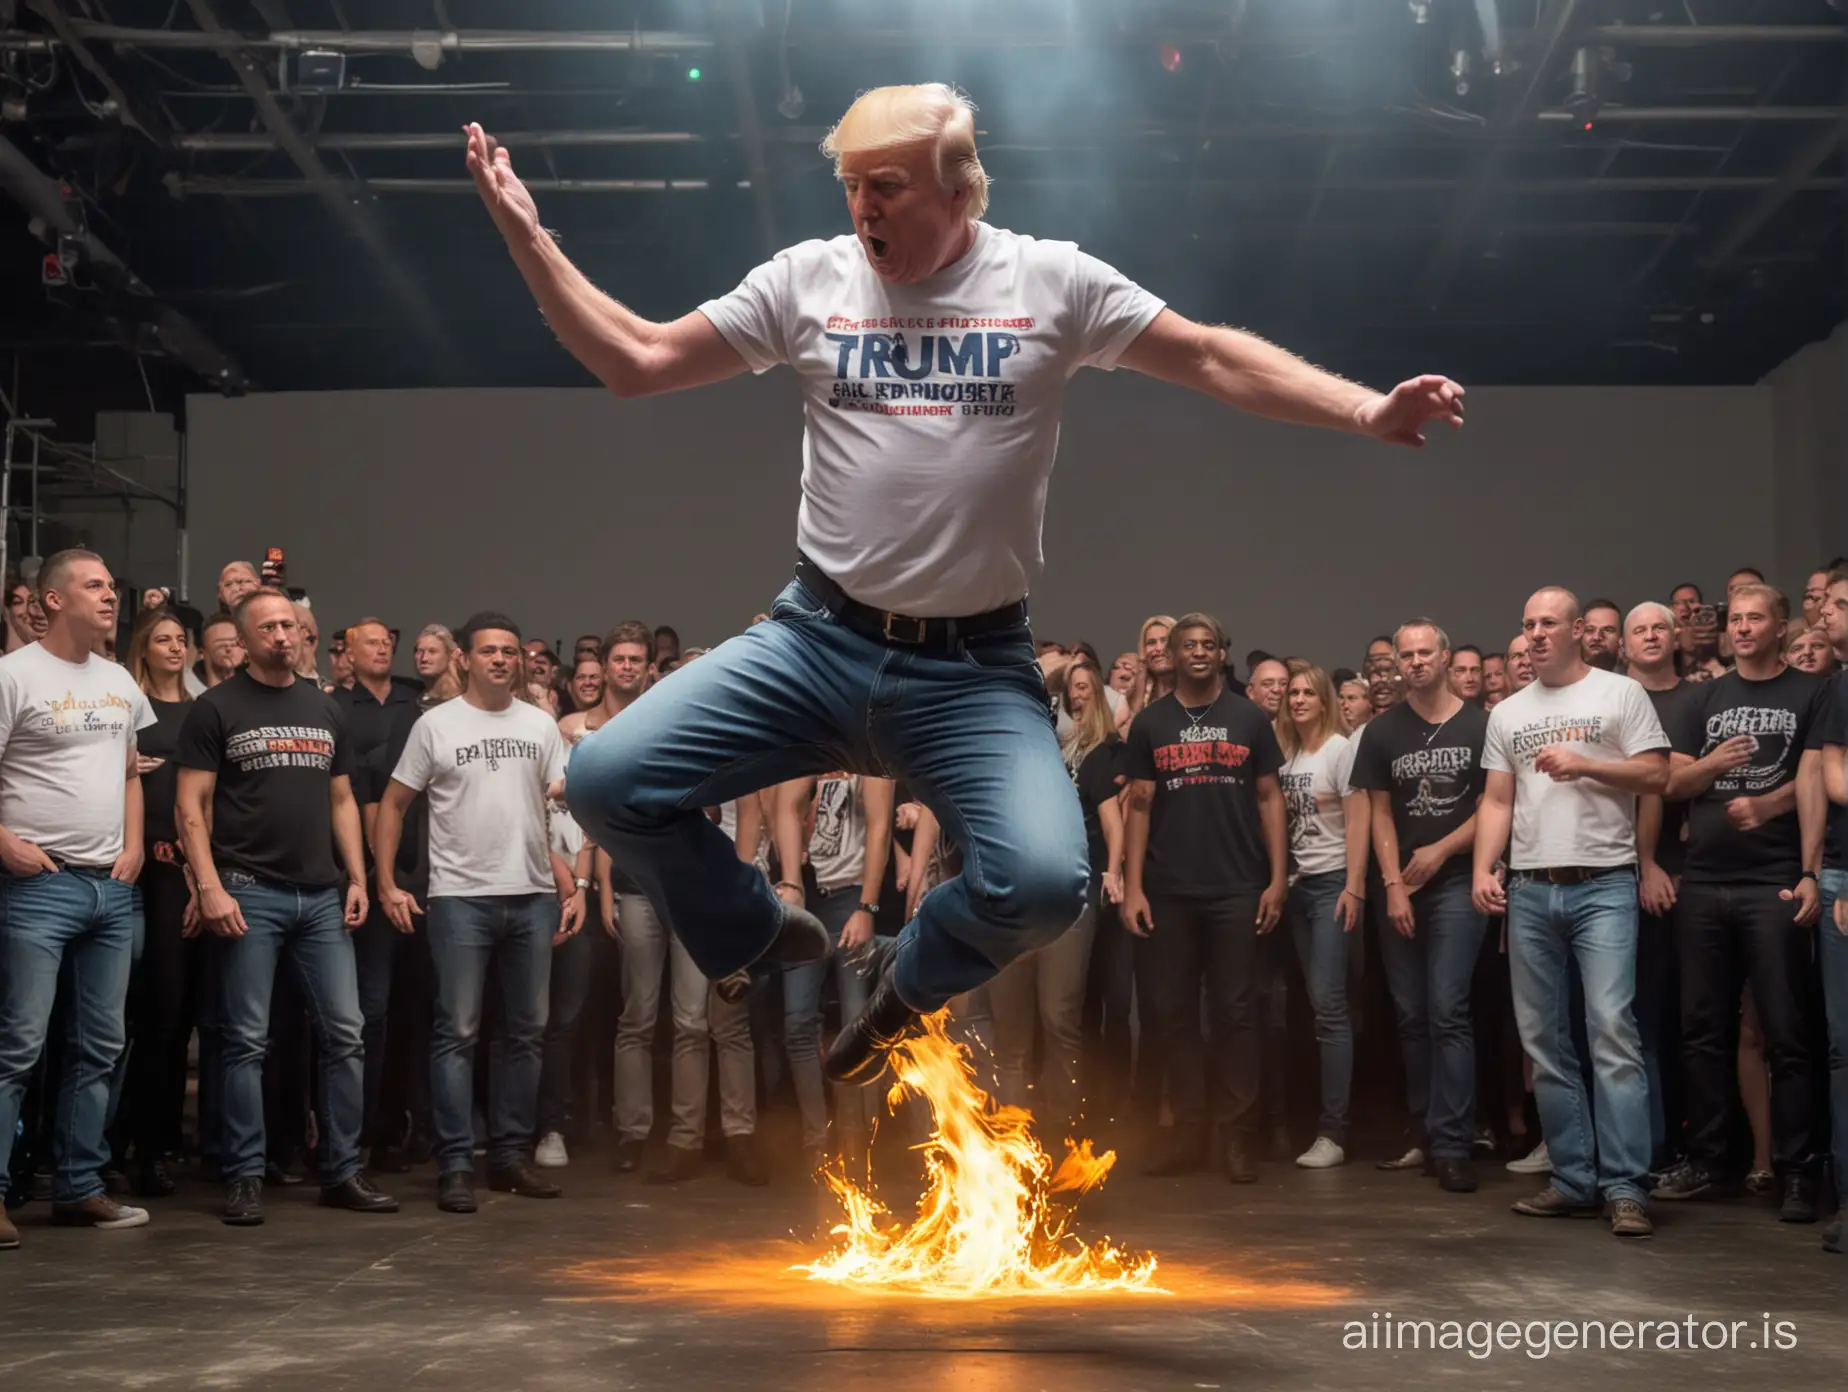 Donald Trump in Techno Club with T-Shirt and Jeans tries fire acrobatic at the dancing area